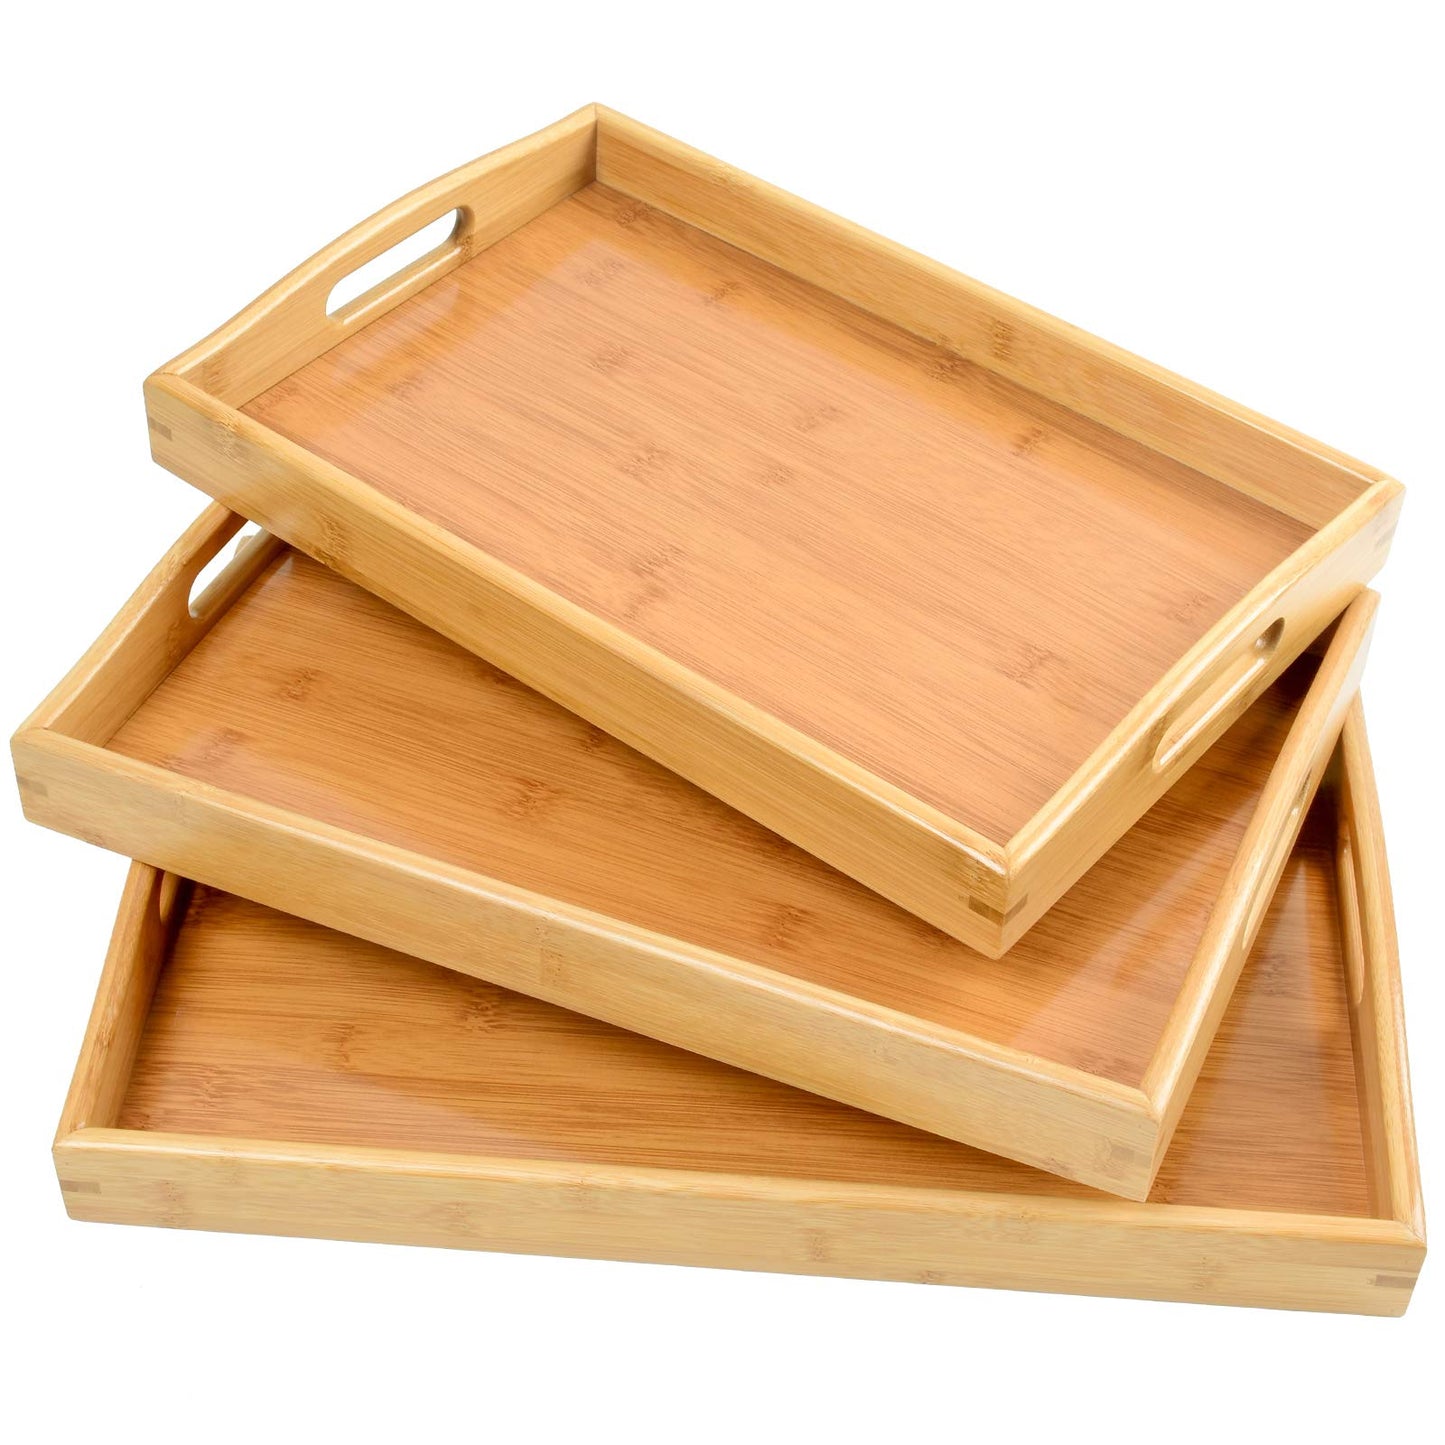 Bamboo 3 Pack Serving Tray Kitchen Food Tray with Handles Serving Platters Tray Great for Dinners Party,Tea Bar, Table Breakfast Snack